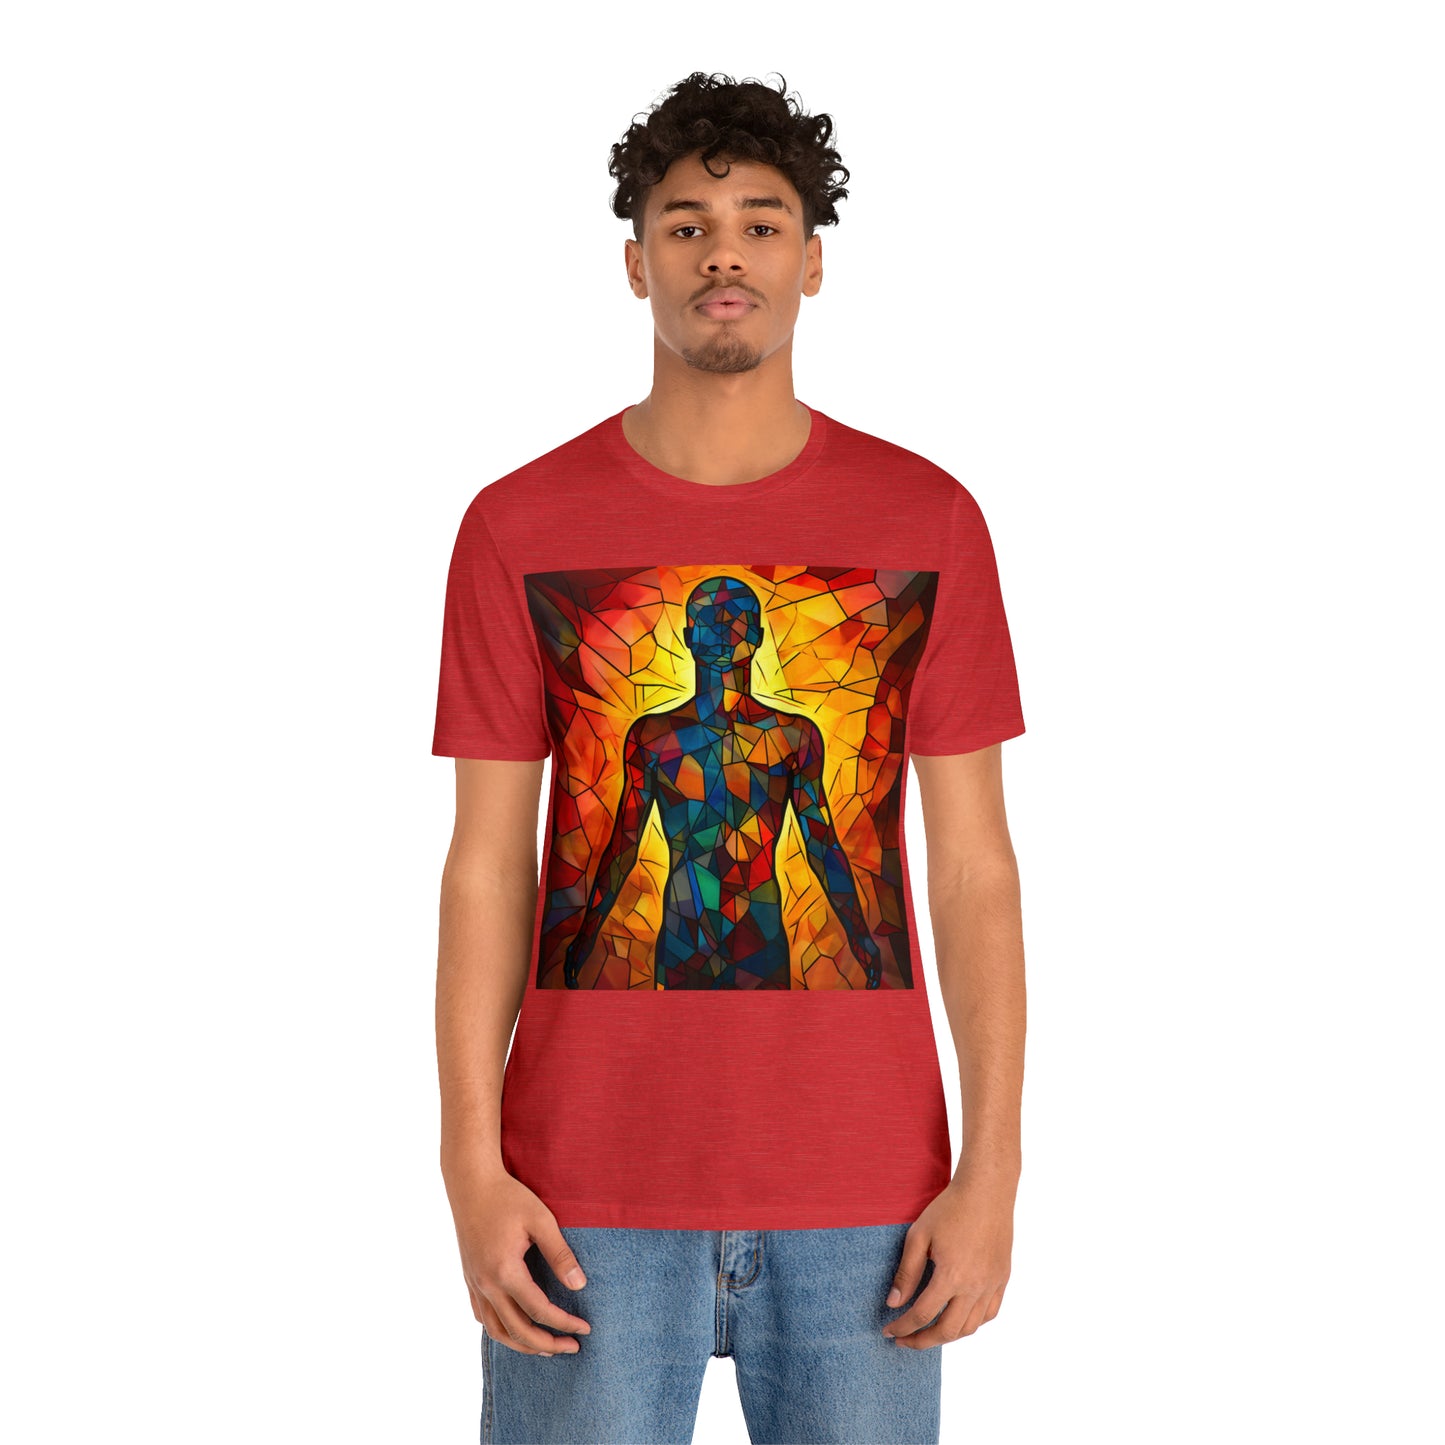 Stained Glass Person Tee